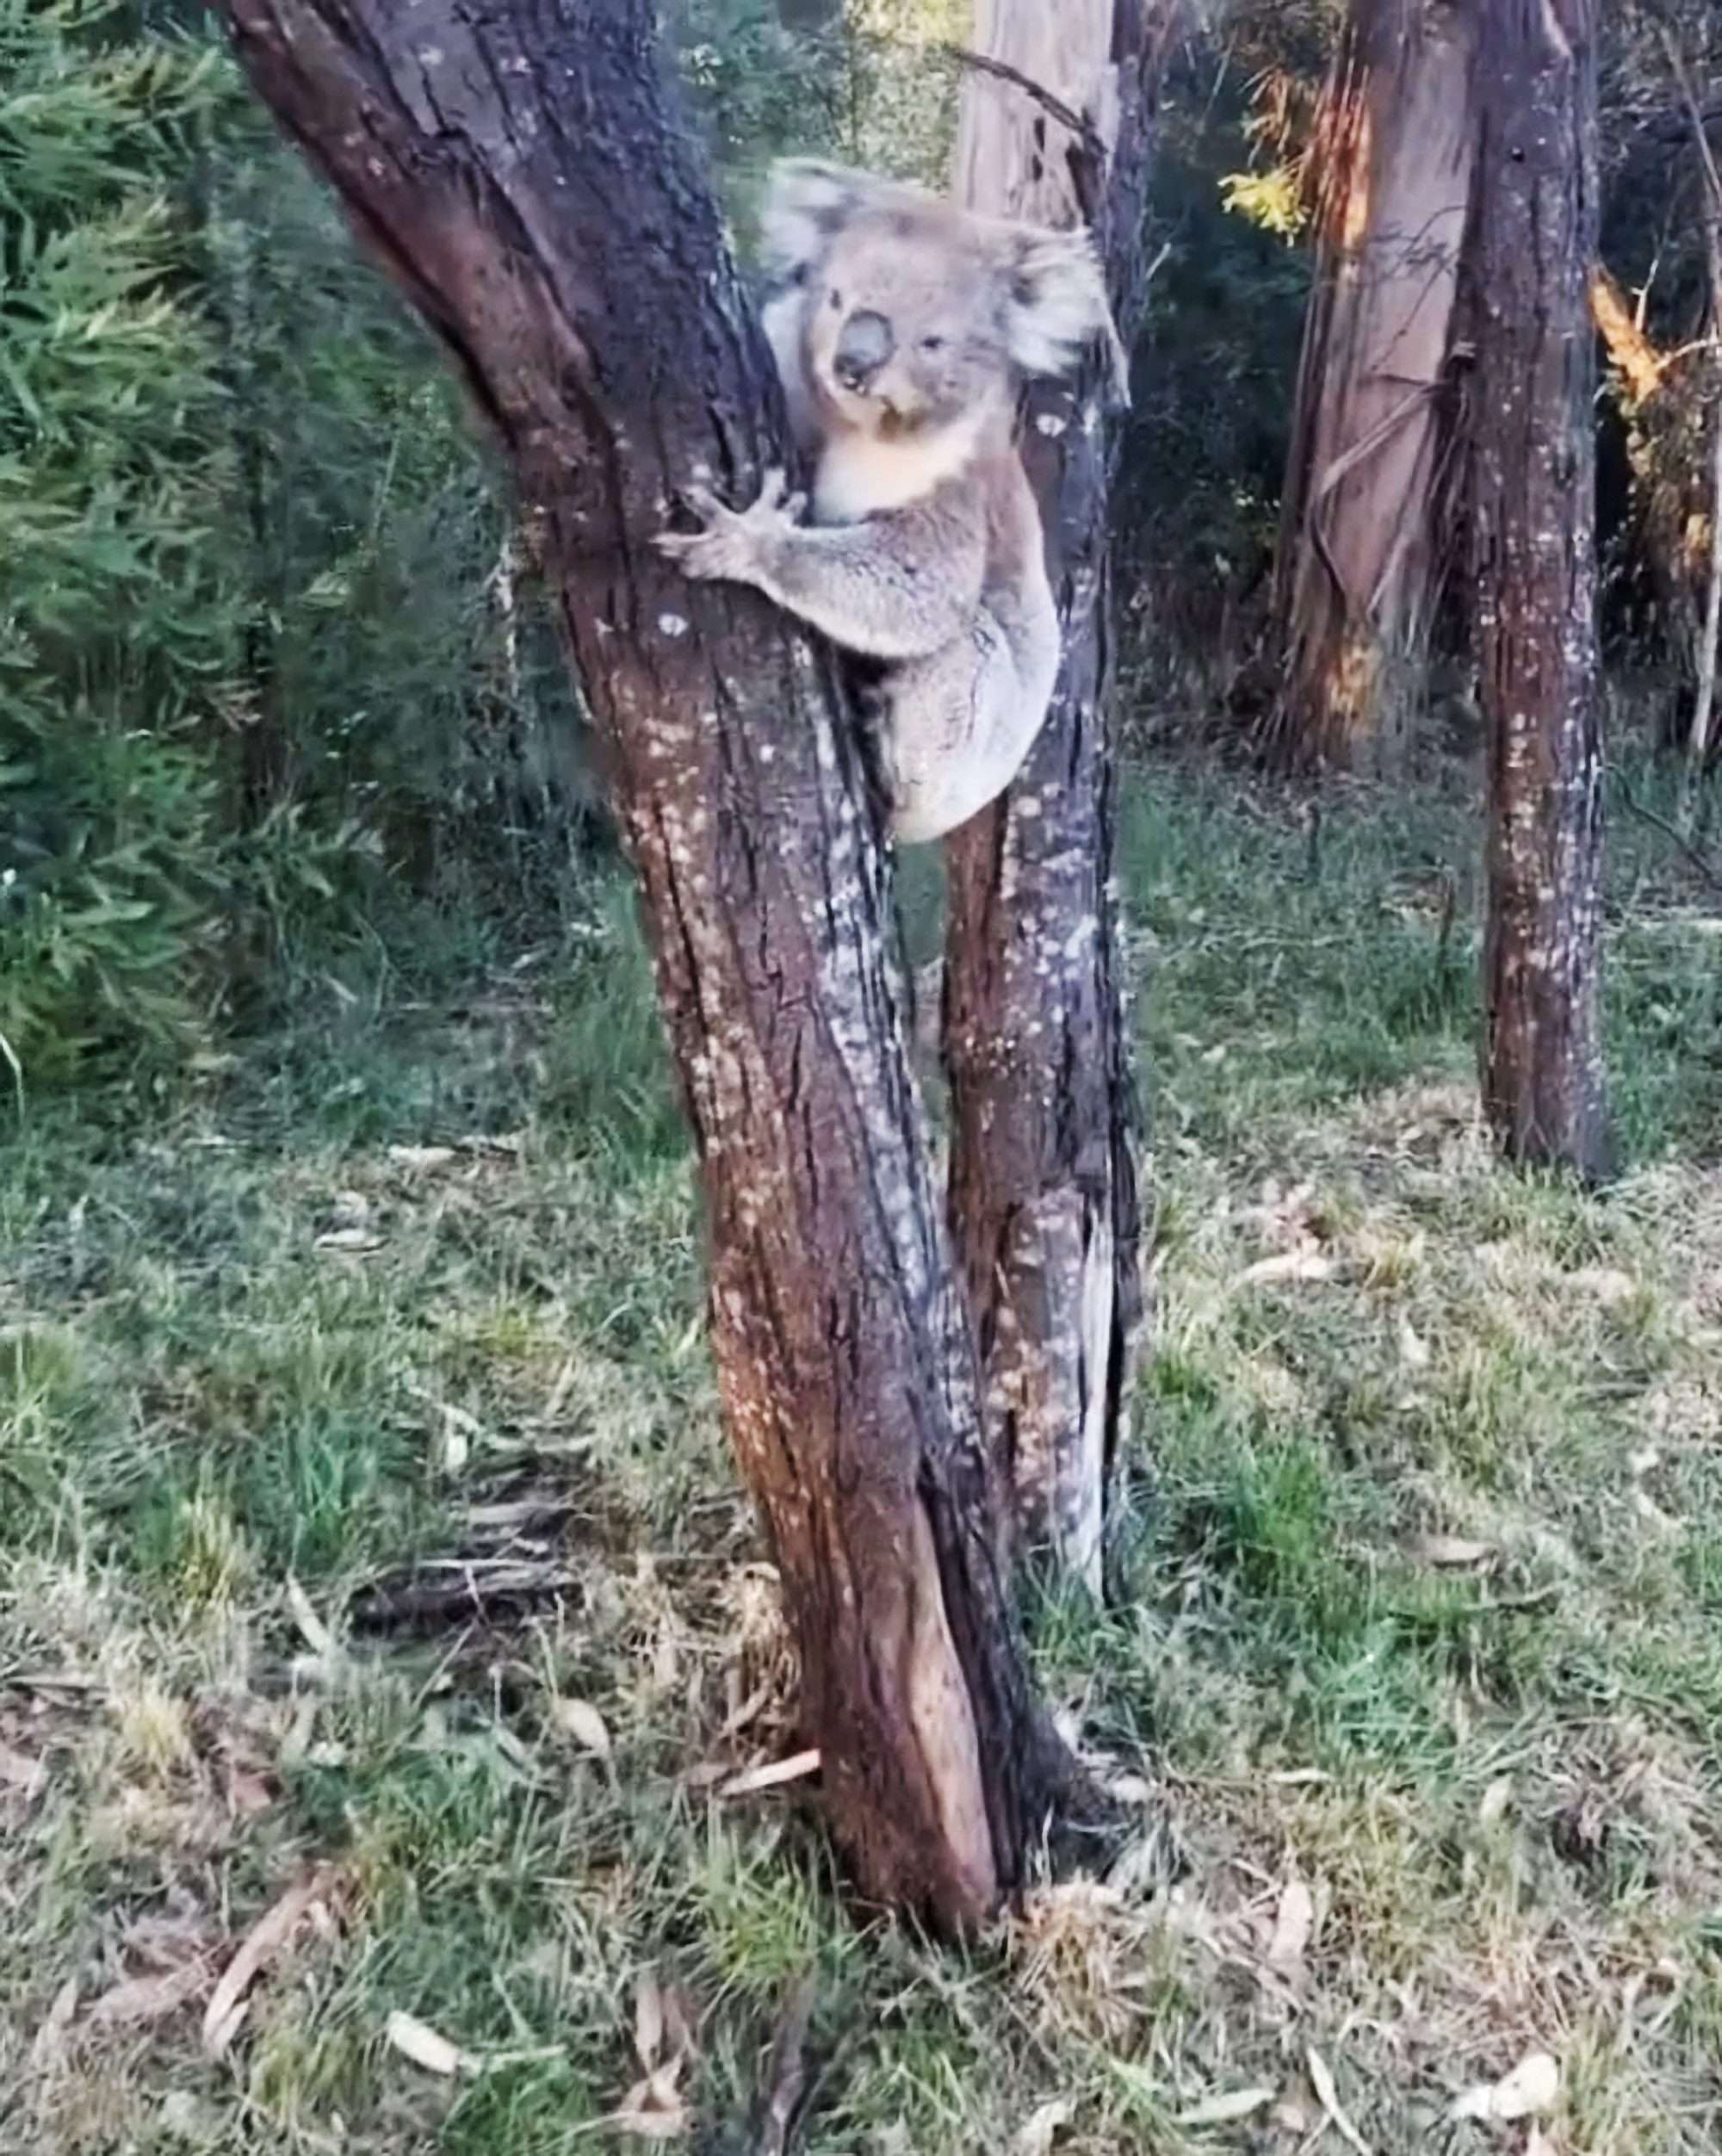 Read more about the article Beekeeper Encounters Koala Trying To Look Inconspicuous Near His Hives